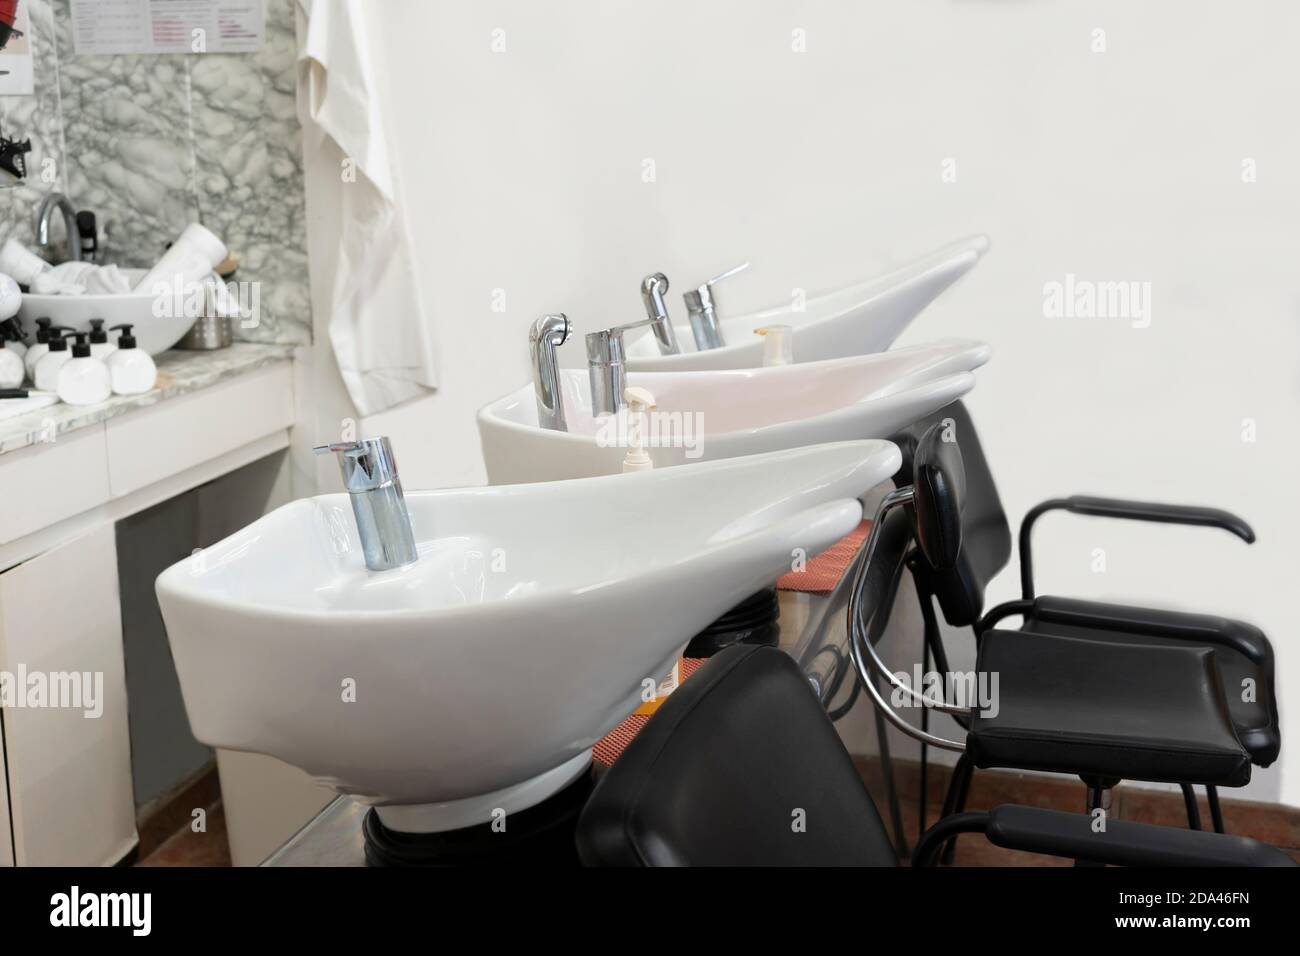 Barber shop, hairdressing salon interior.Hair wash basins chairs. Copy space text. Stock Photo